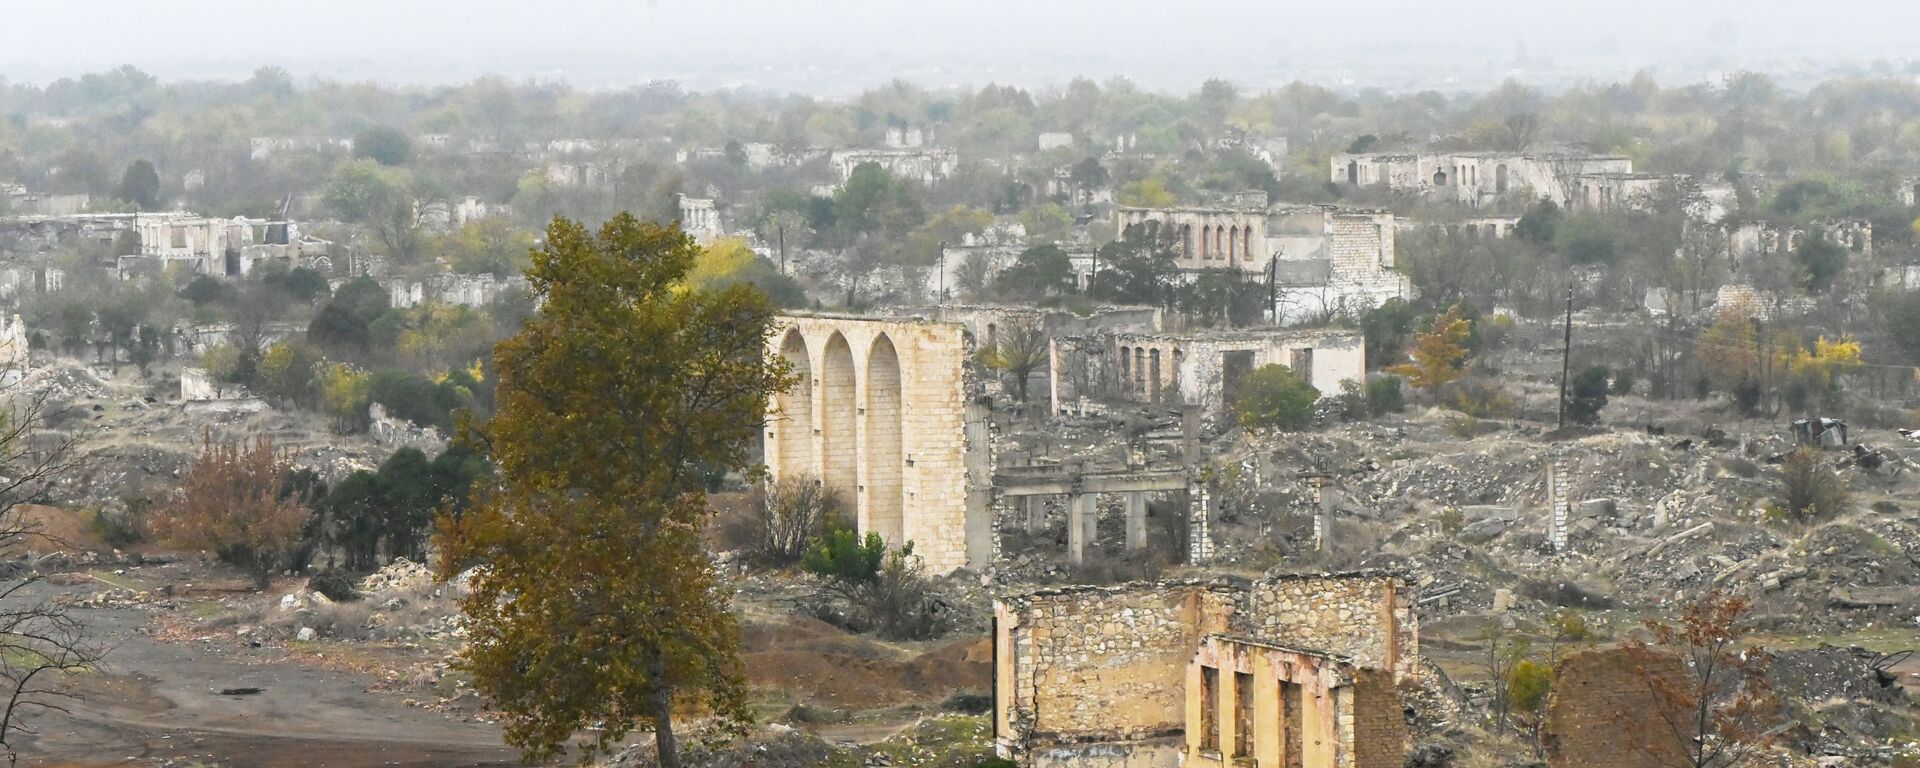 The view shows the destroyed part of the city of Aghdam, the self-proclaimed Nagorno-Karabakh Republic. The city was almost completely destroyed during the fighting in the early 90's. According to the ceasefire agreement in Nagorno-Karabakh, the Agdam region must be transferred to the Republic of Azerbaijan by November 20, 2020 - Sputnik International, 1920, 03.08.2022